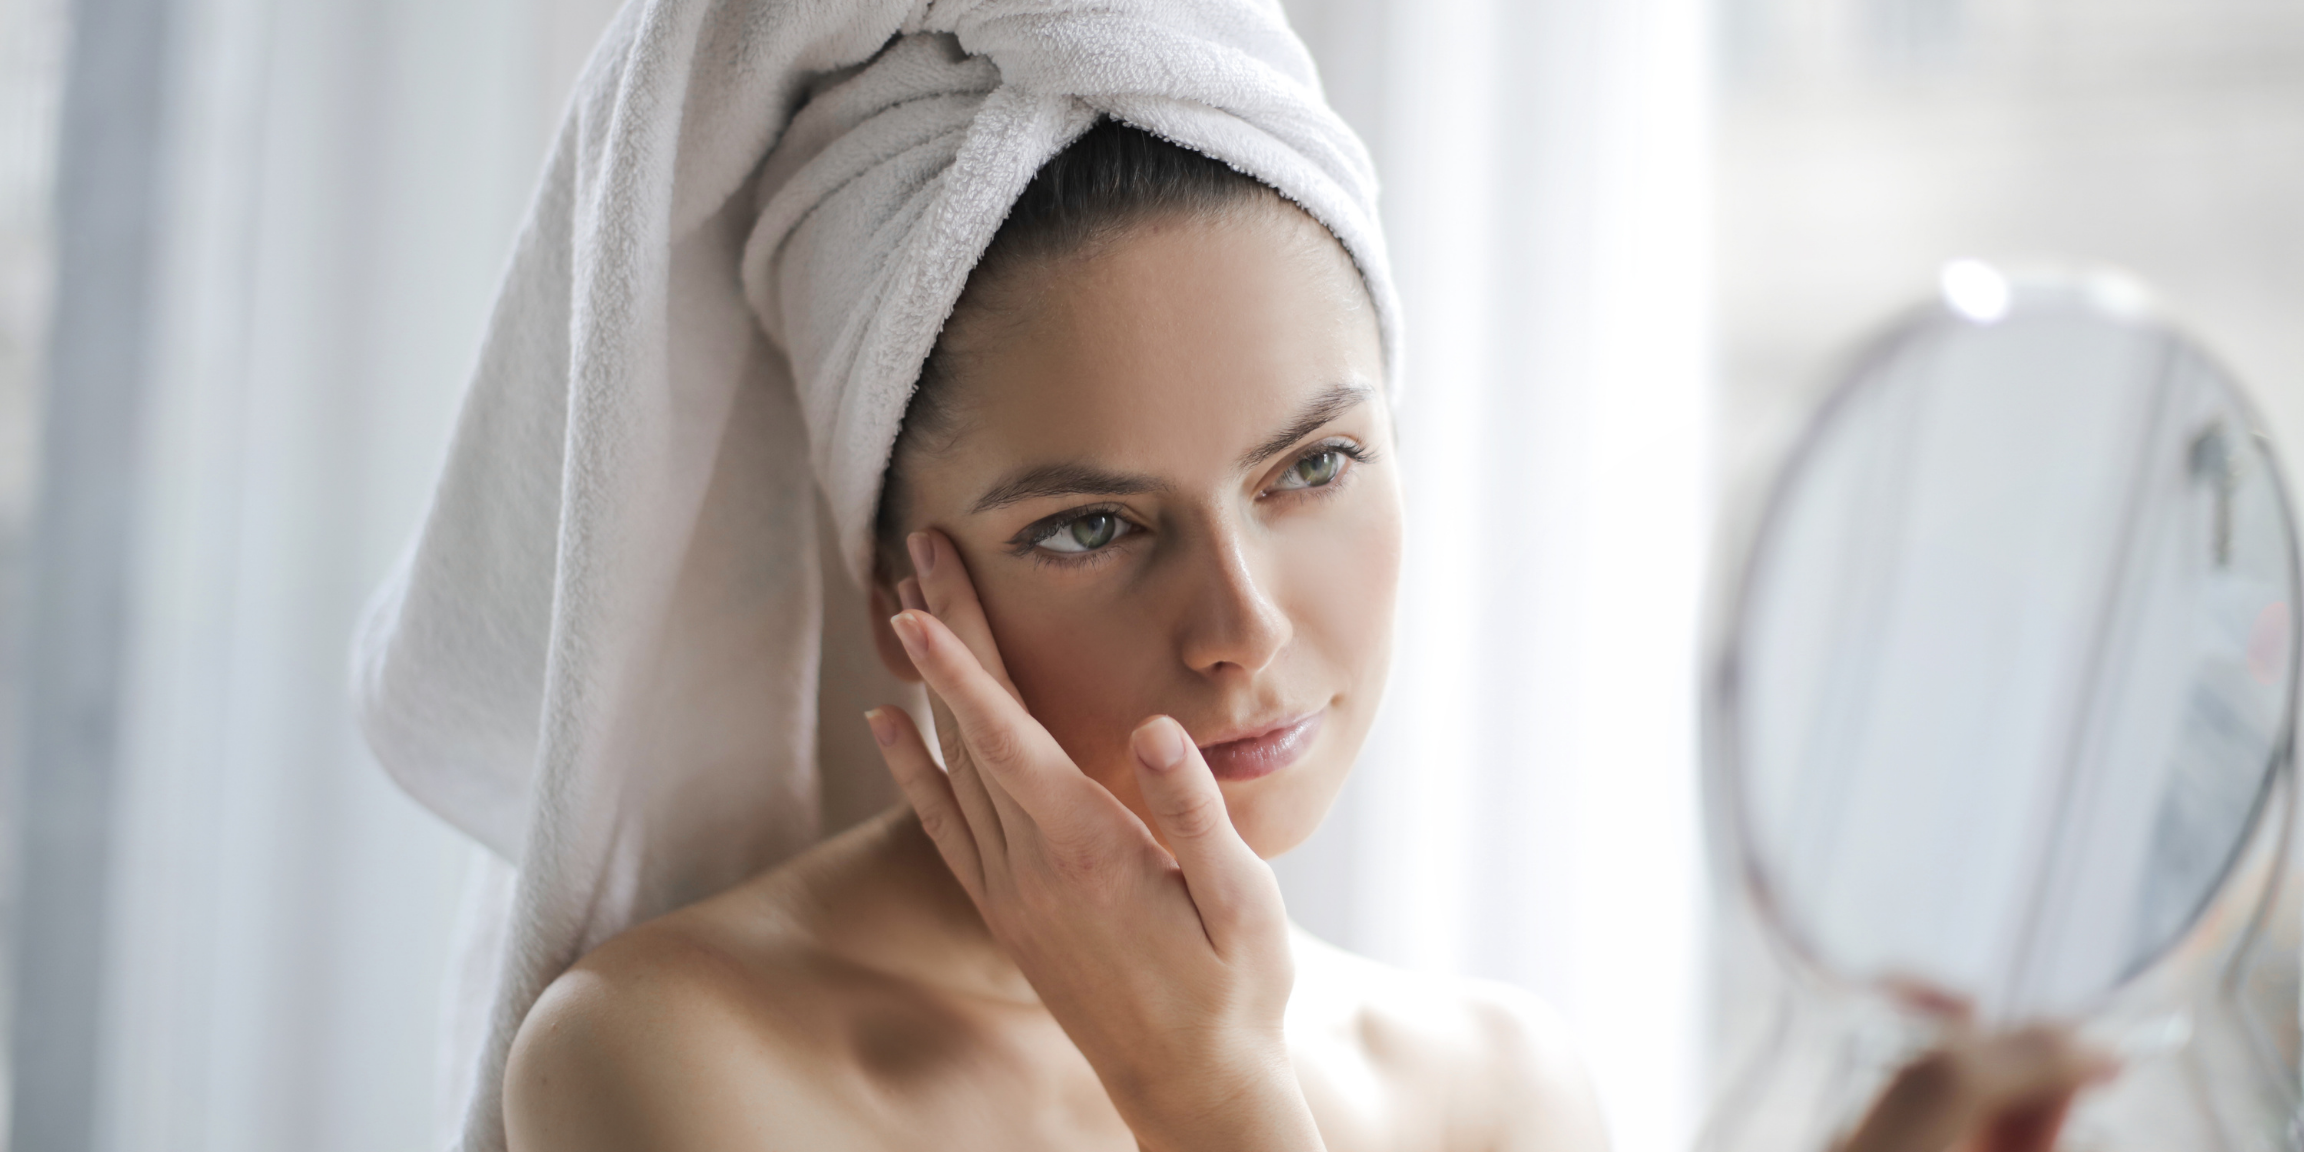 woman with her hair up in a towel, touching her face and looking in mirror